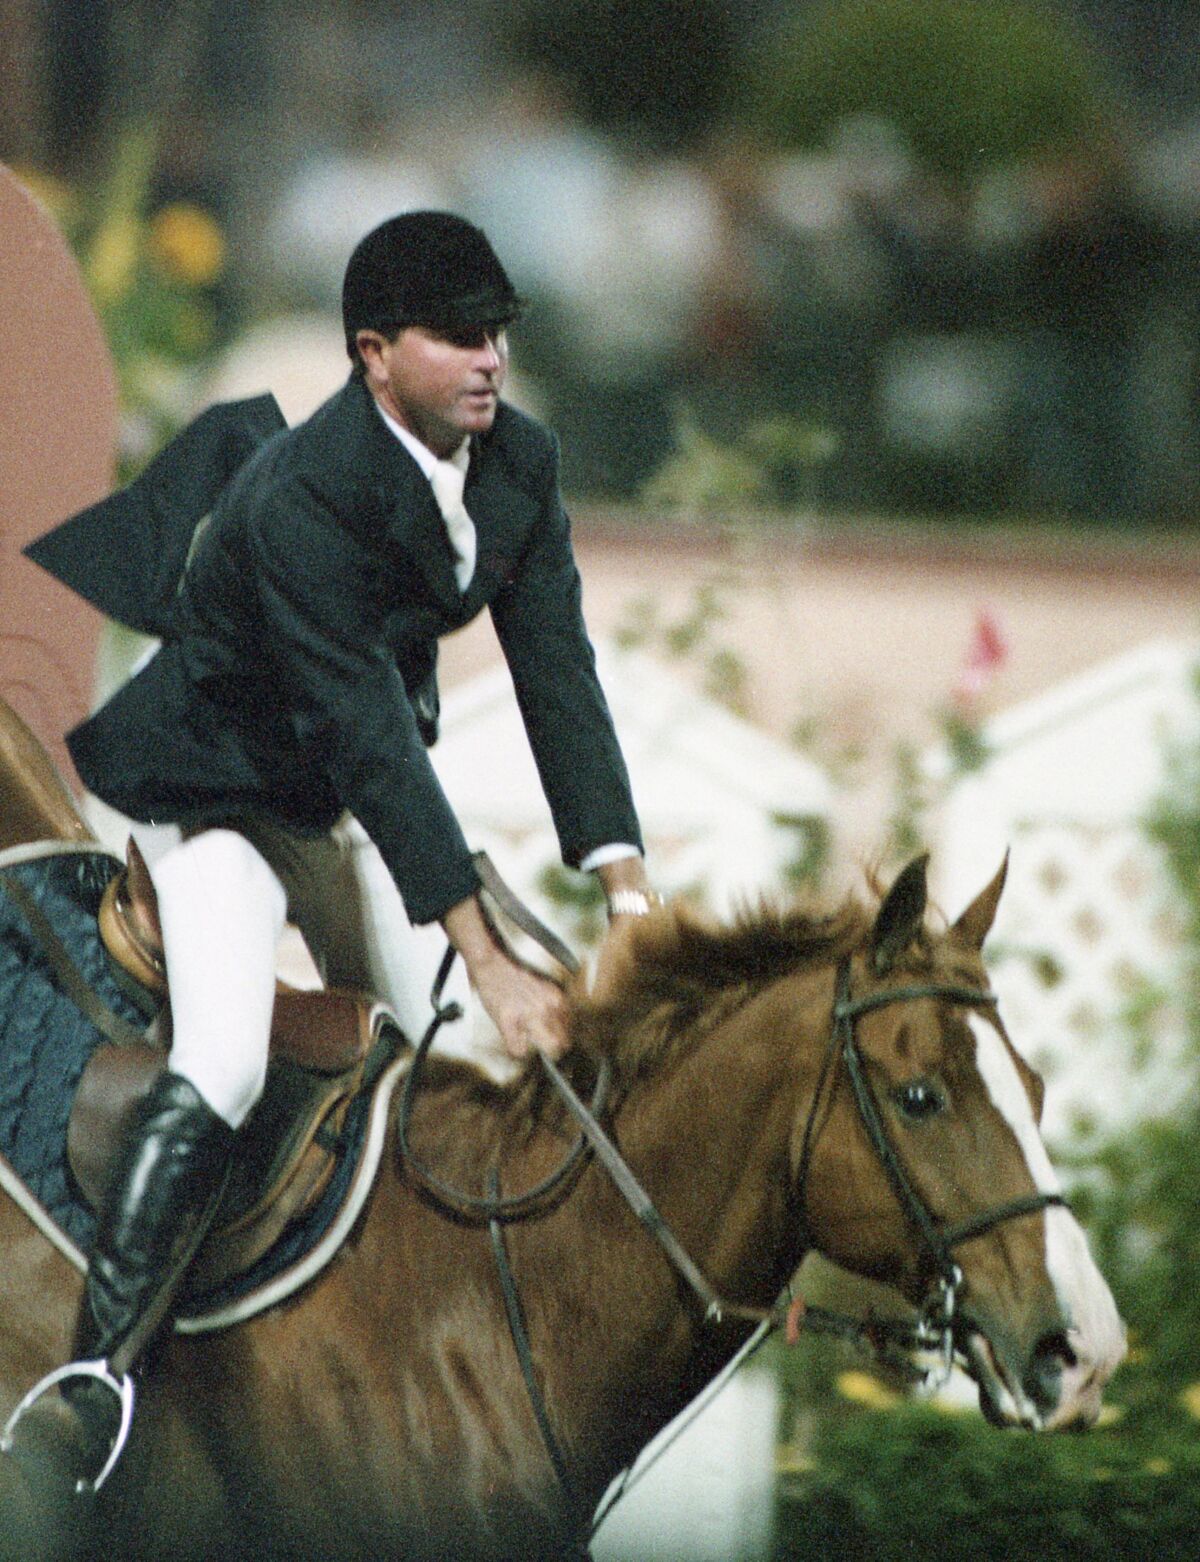 Rob Gage, riding Last Laugh in the $30,000 Grand Prix of Del Mar at the Del Mar National Horse Show on May 7, 1994. (James Skovmand / The San Diego Union-Tribune) User Upload Caption: U-T file photos of equestrian Rob Gage (Robert Gage) at Del Mar, May 7, 1994 assignment.